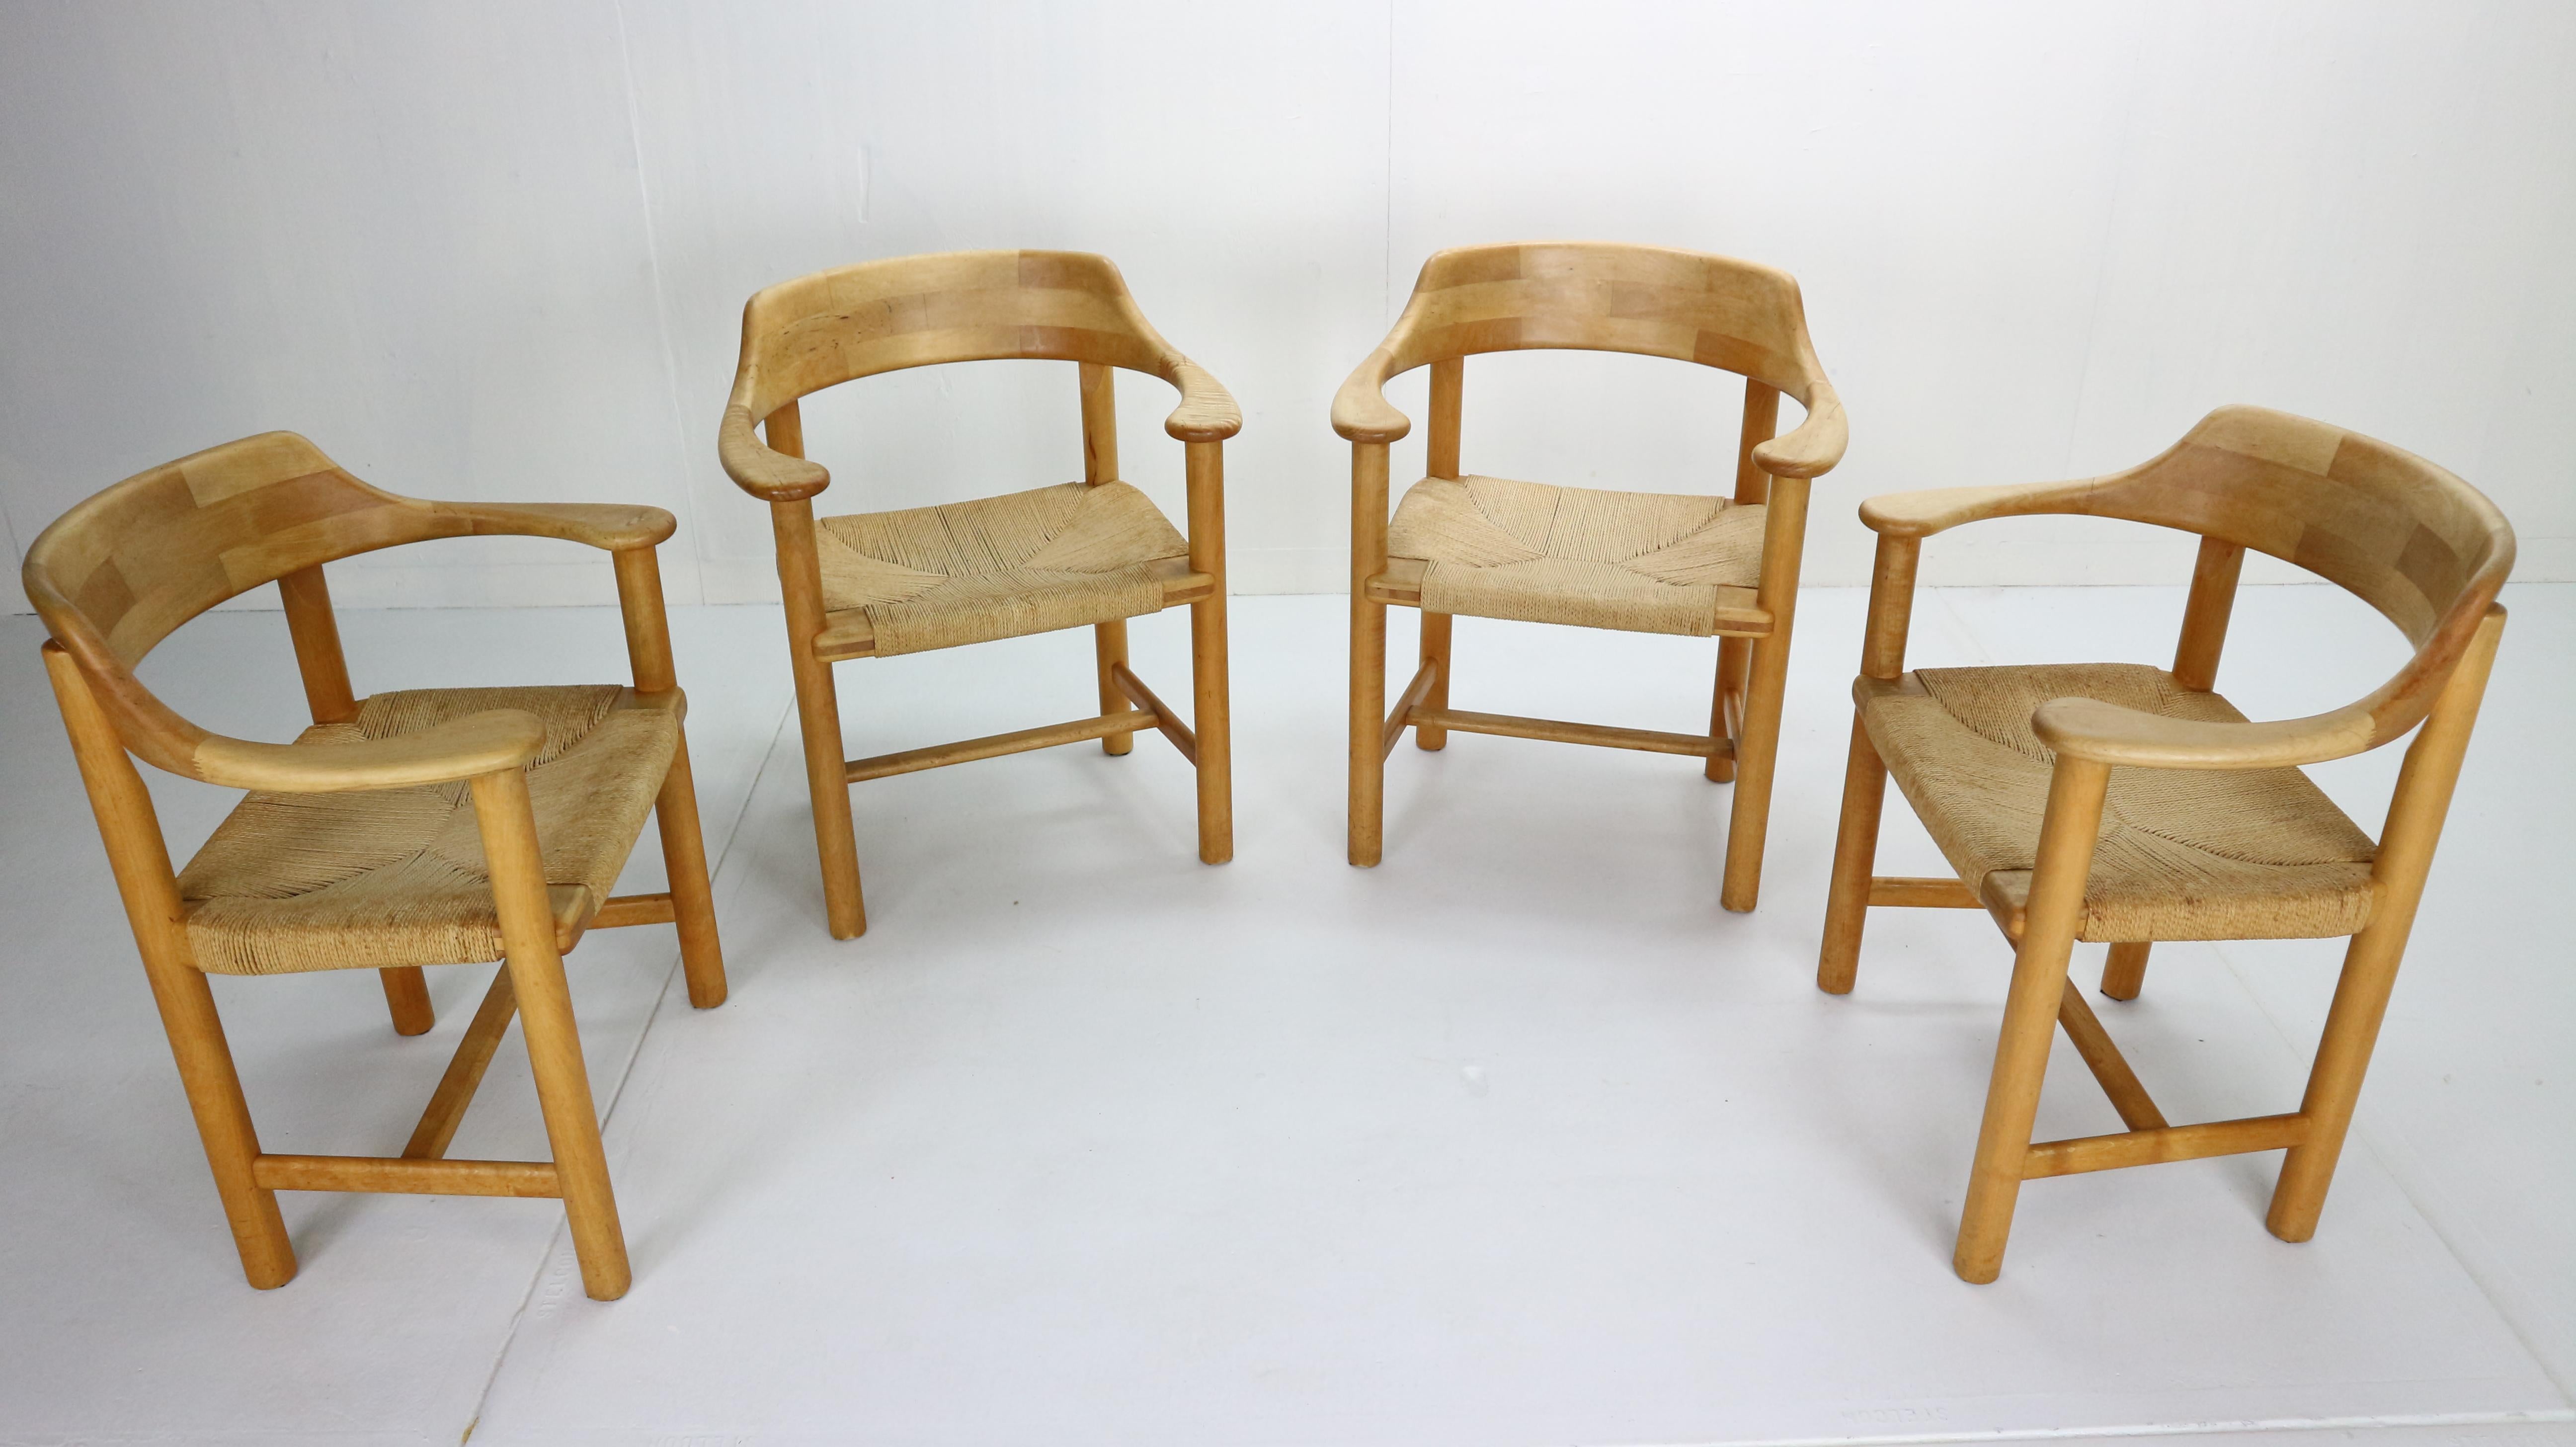 Sculptural, beautiful organic shaped dining chairs in pine wood and paper cord by Rainer Daumiller, manufactured for Hirtshals Sawmill, Denmark in 1970s.
Beautifully carved organic lines of grained pine-wood frame and paper cord seating gives the